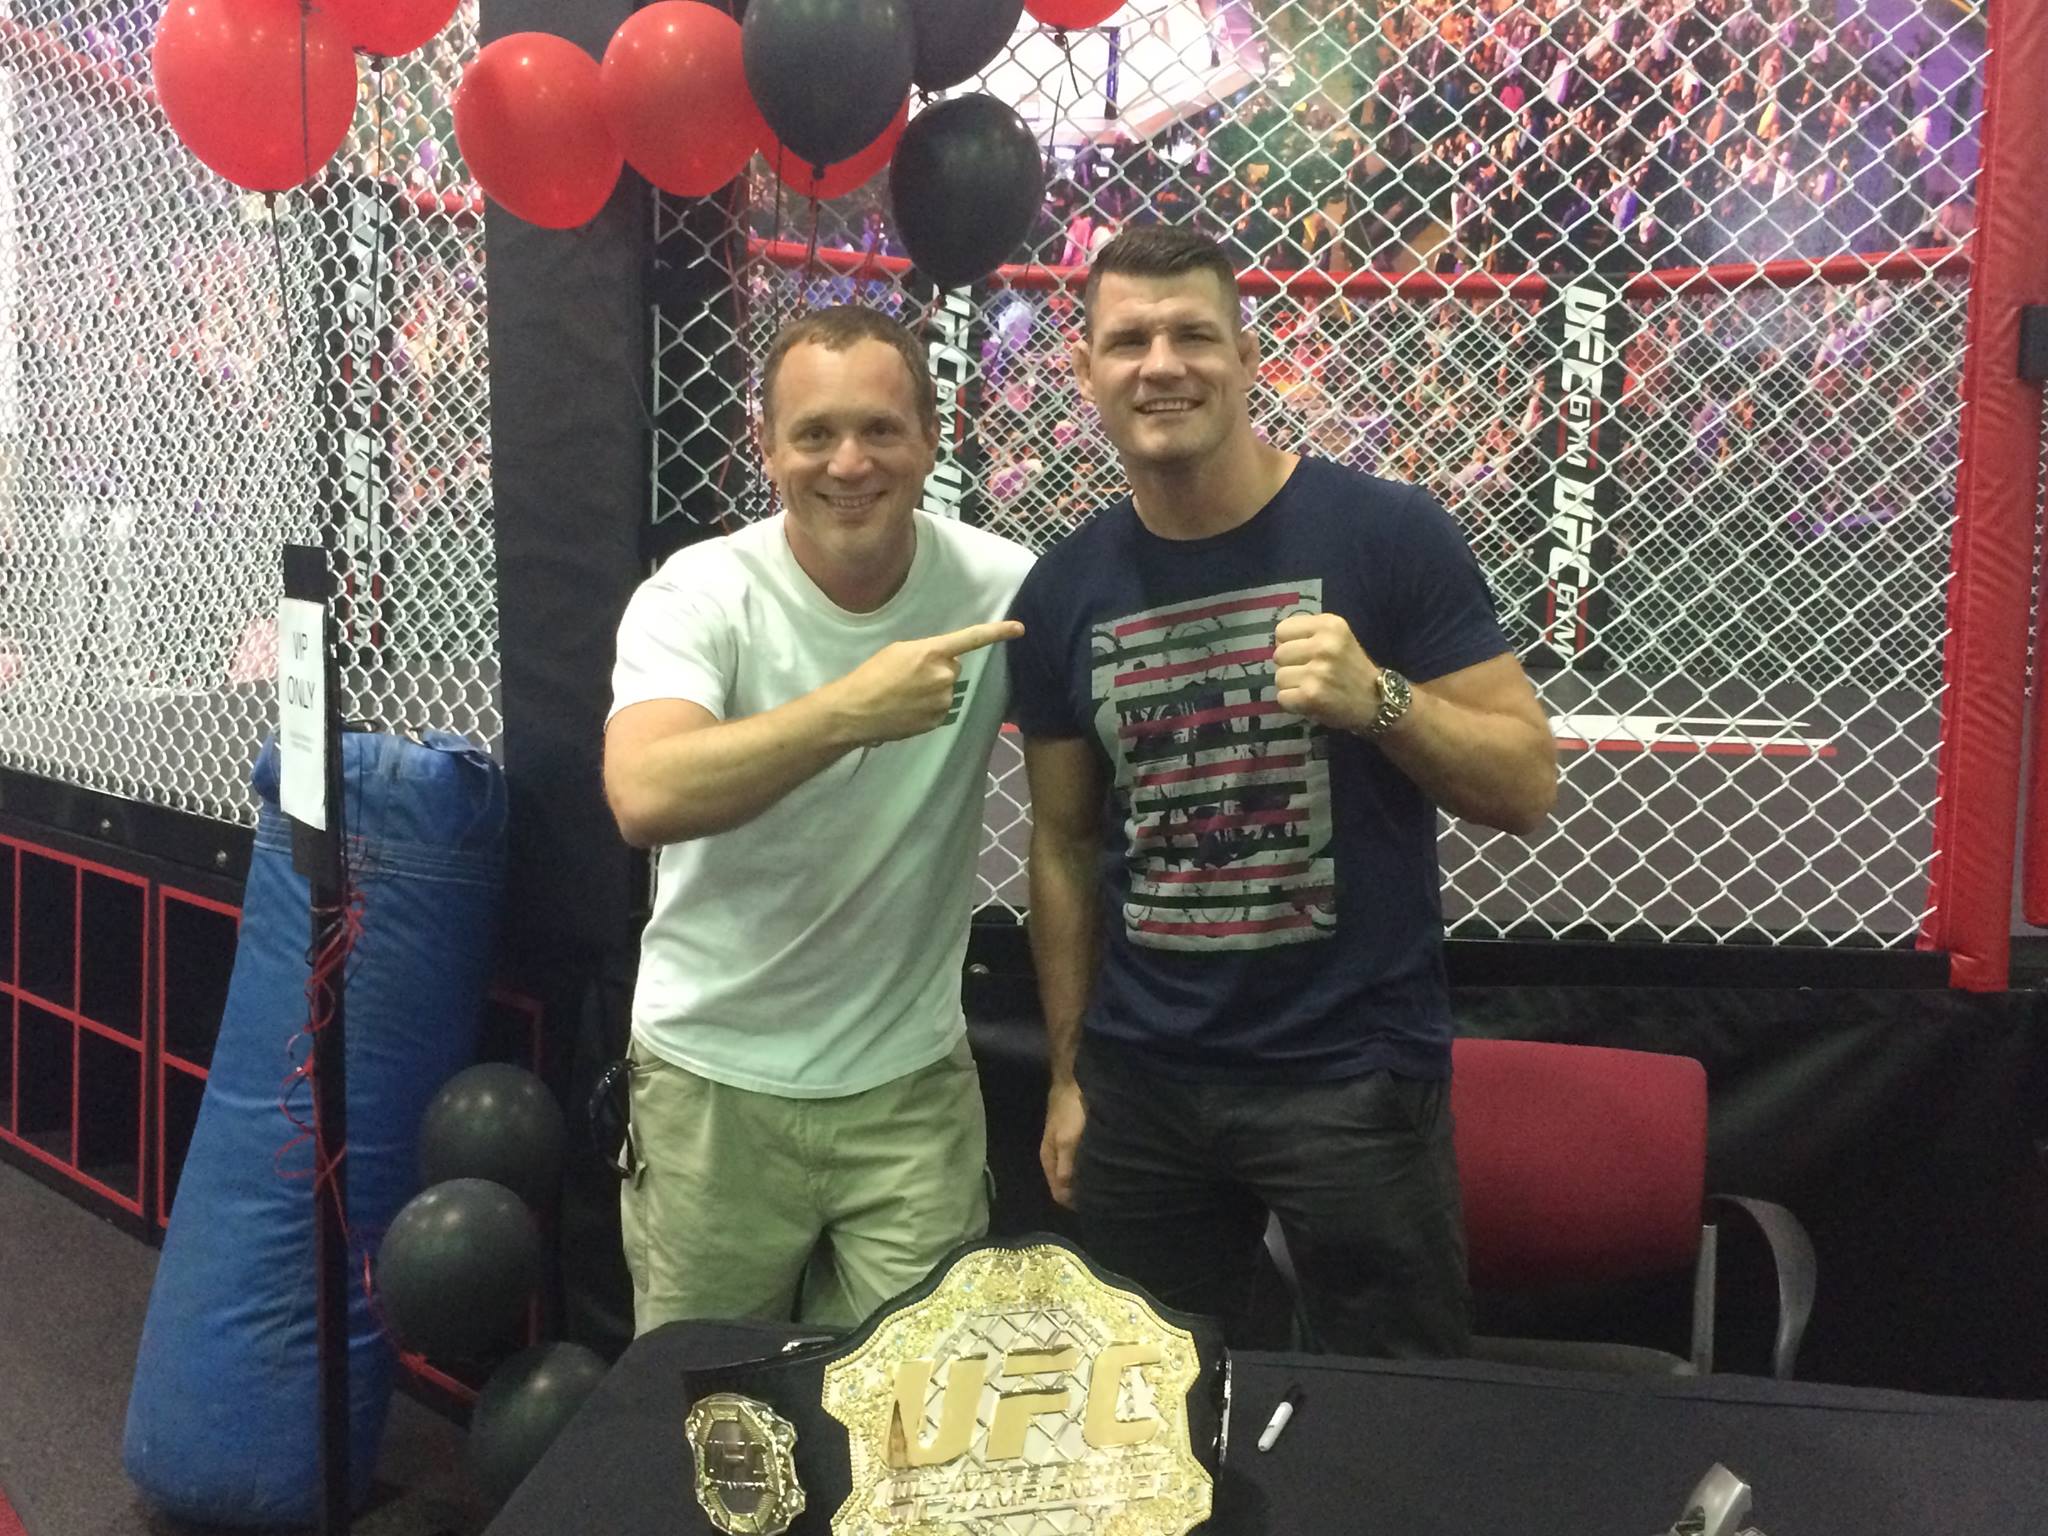 With UFC fighter Michael 